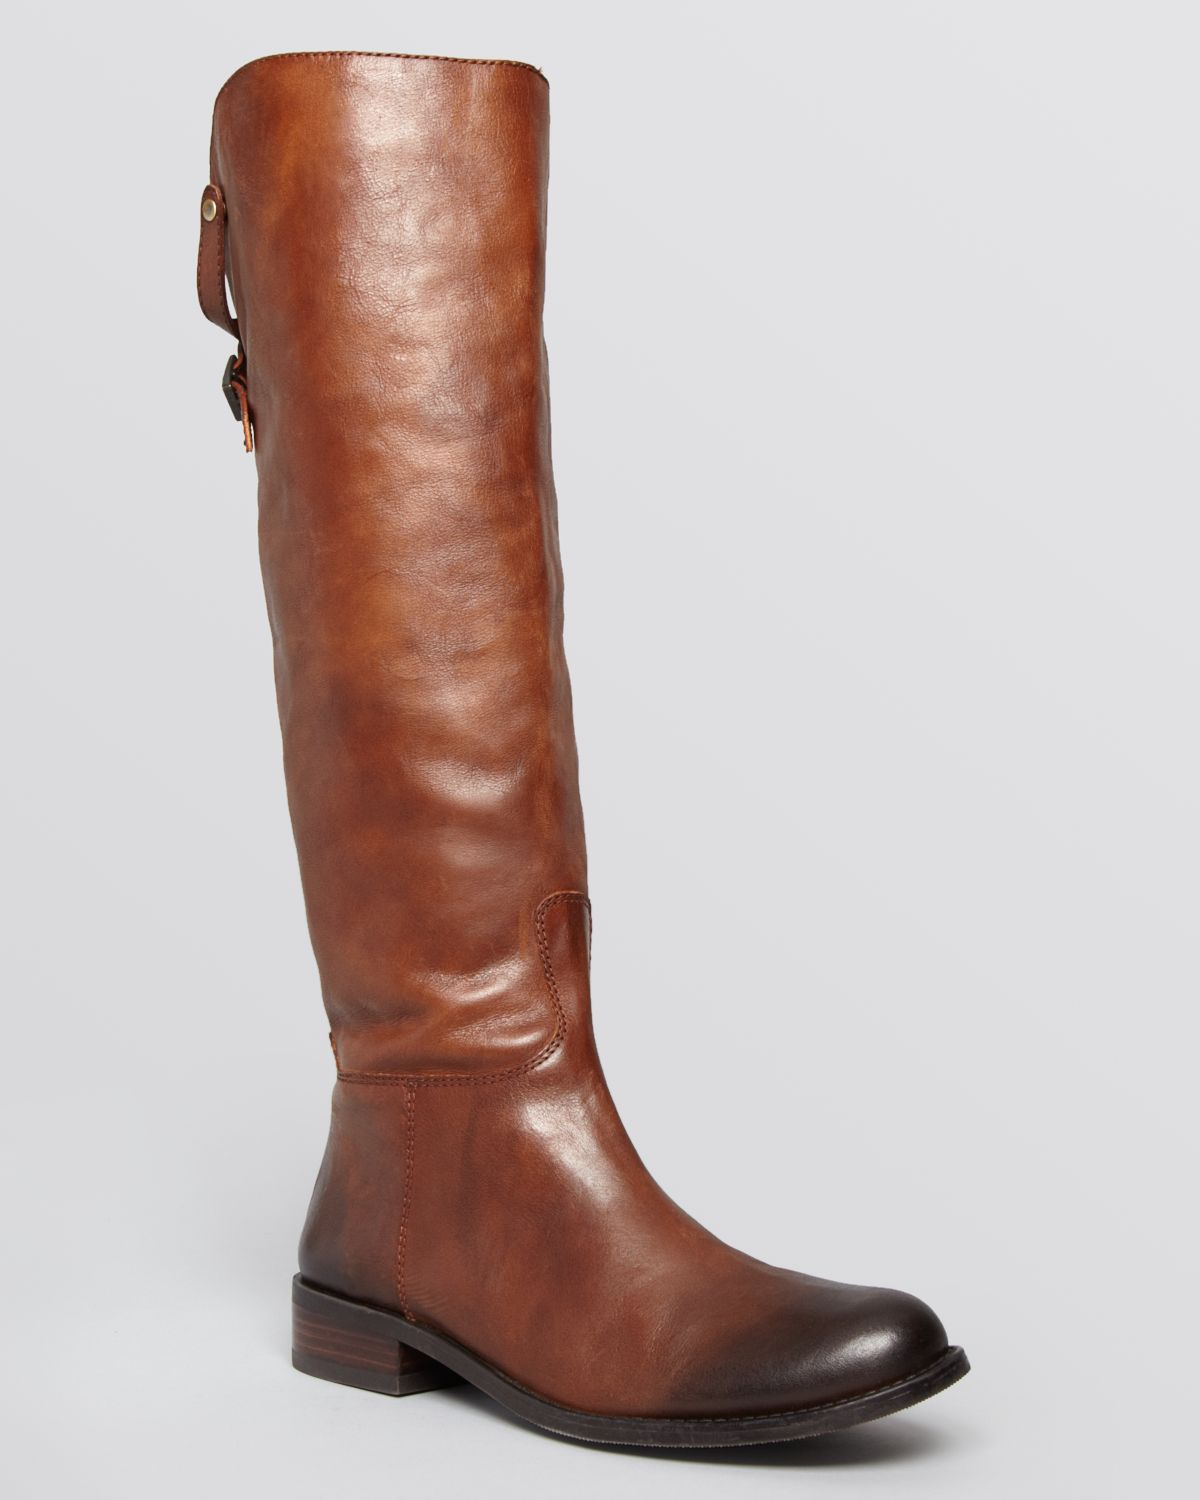 Lyst - Vince Camuto Tall Riding Boots - Kadia Back Buckle in Brown